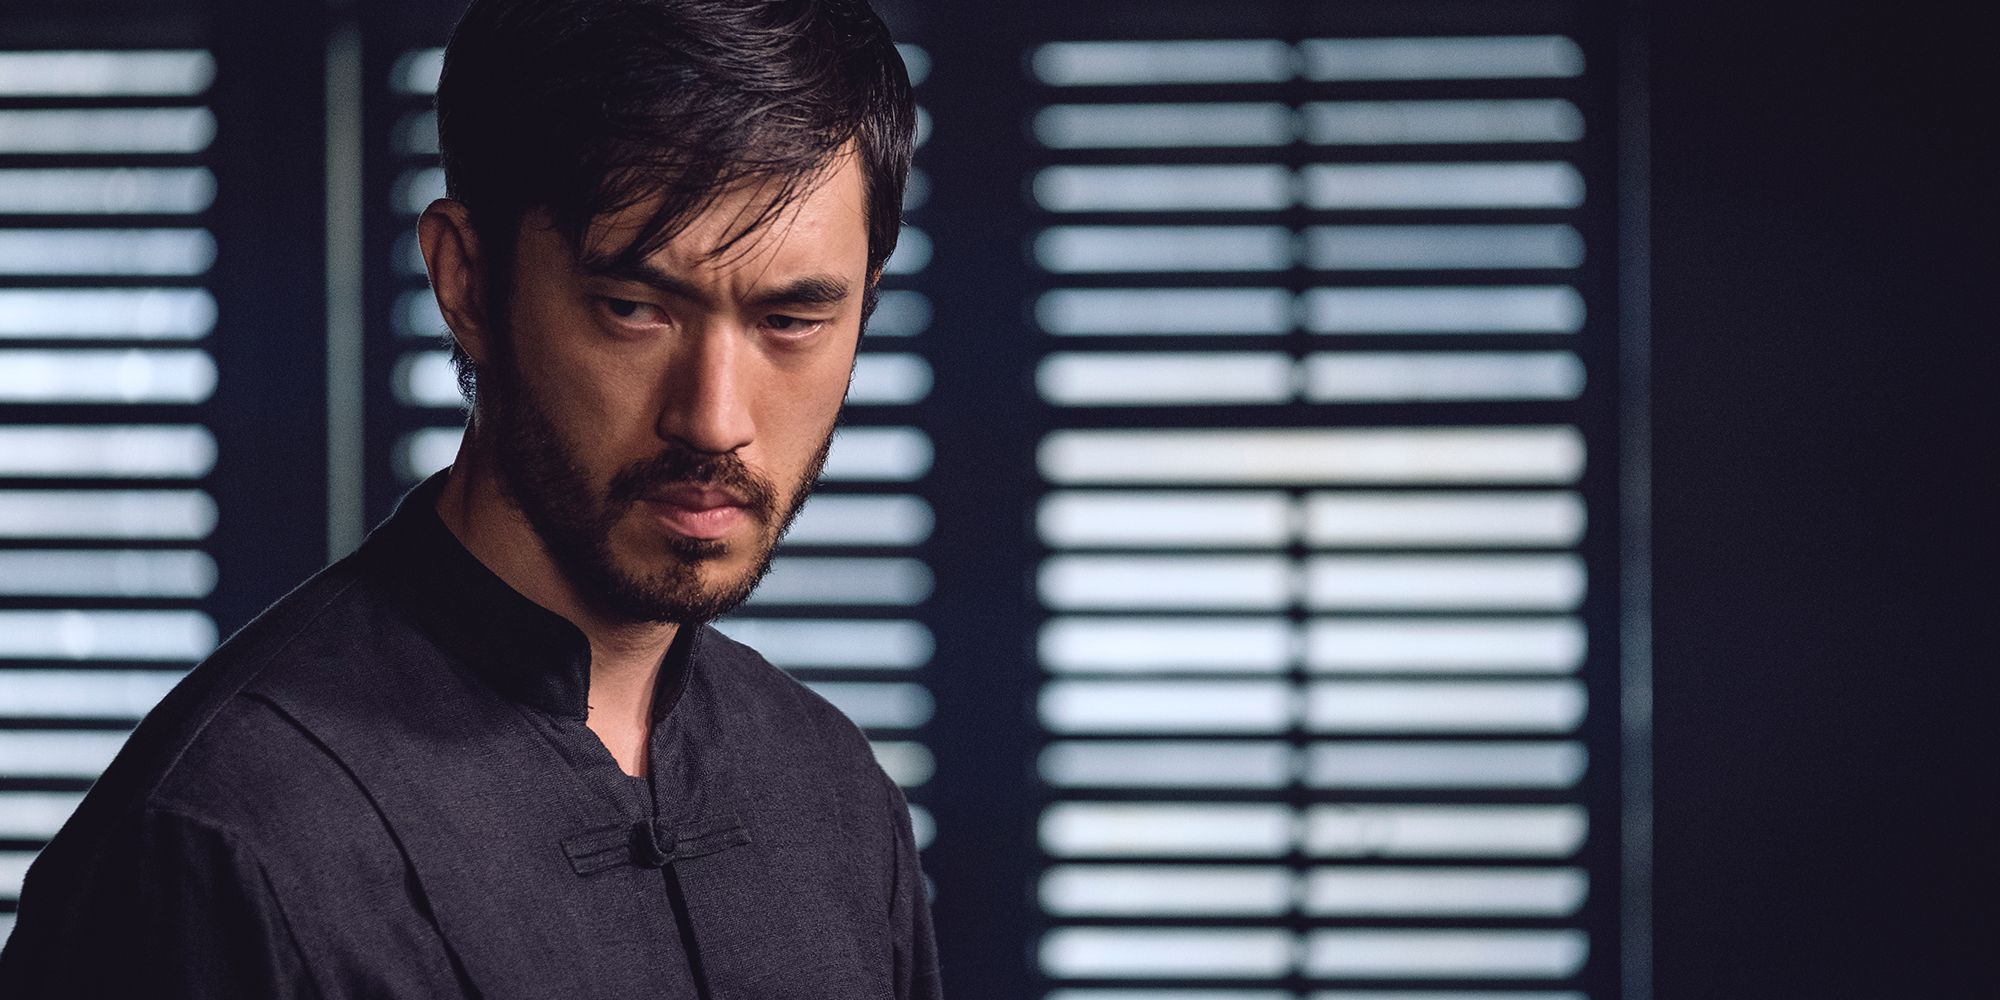 TV series Warrior, inspired by Bruce Lee, gives its star Andrew